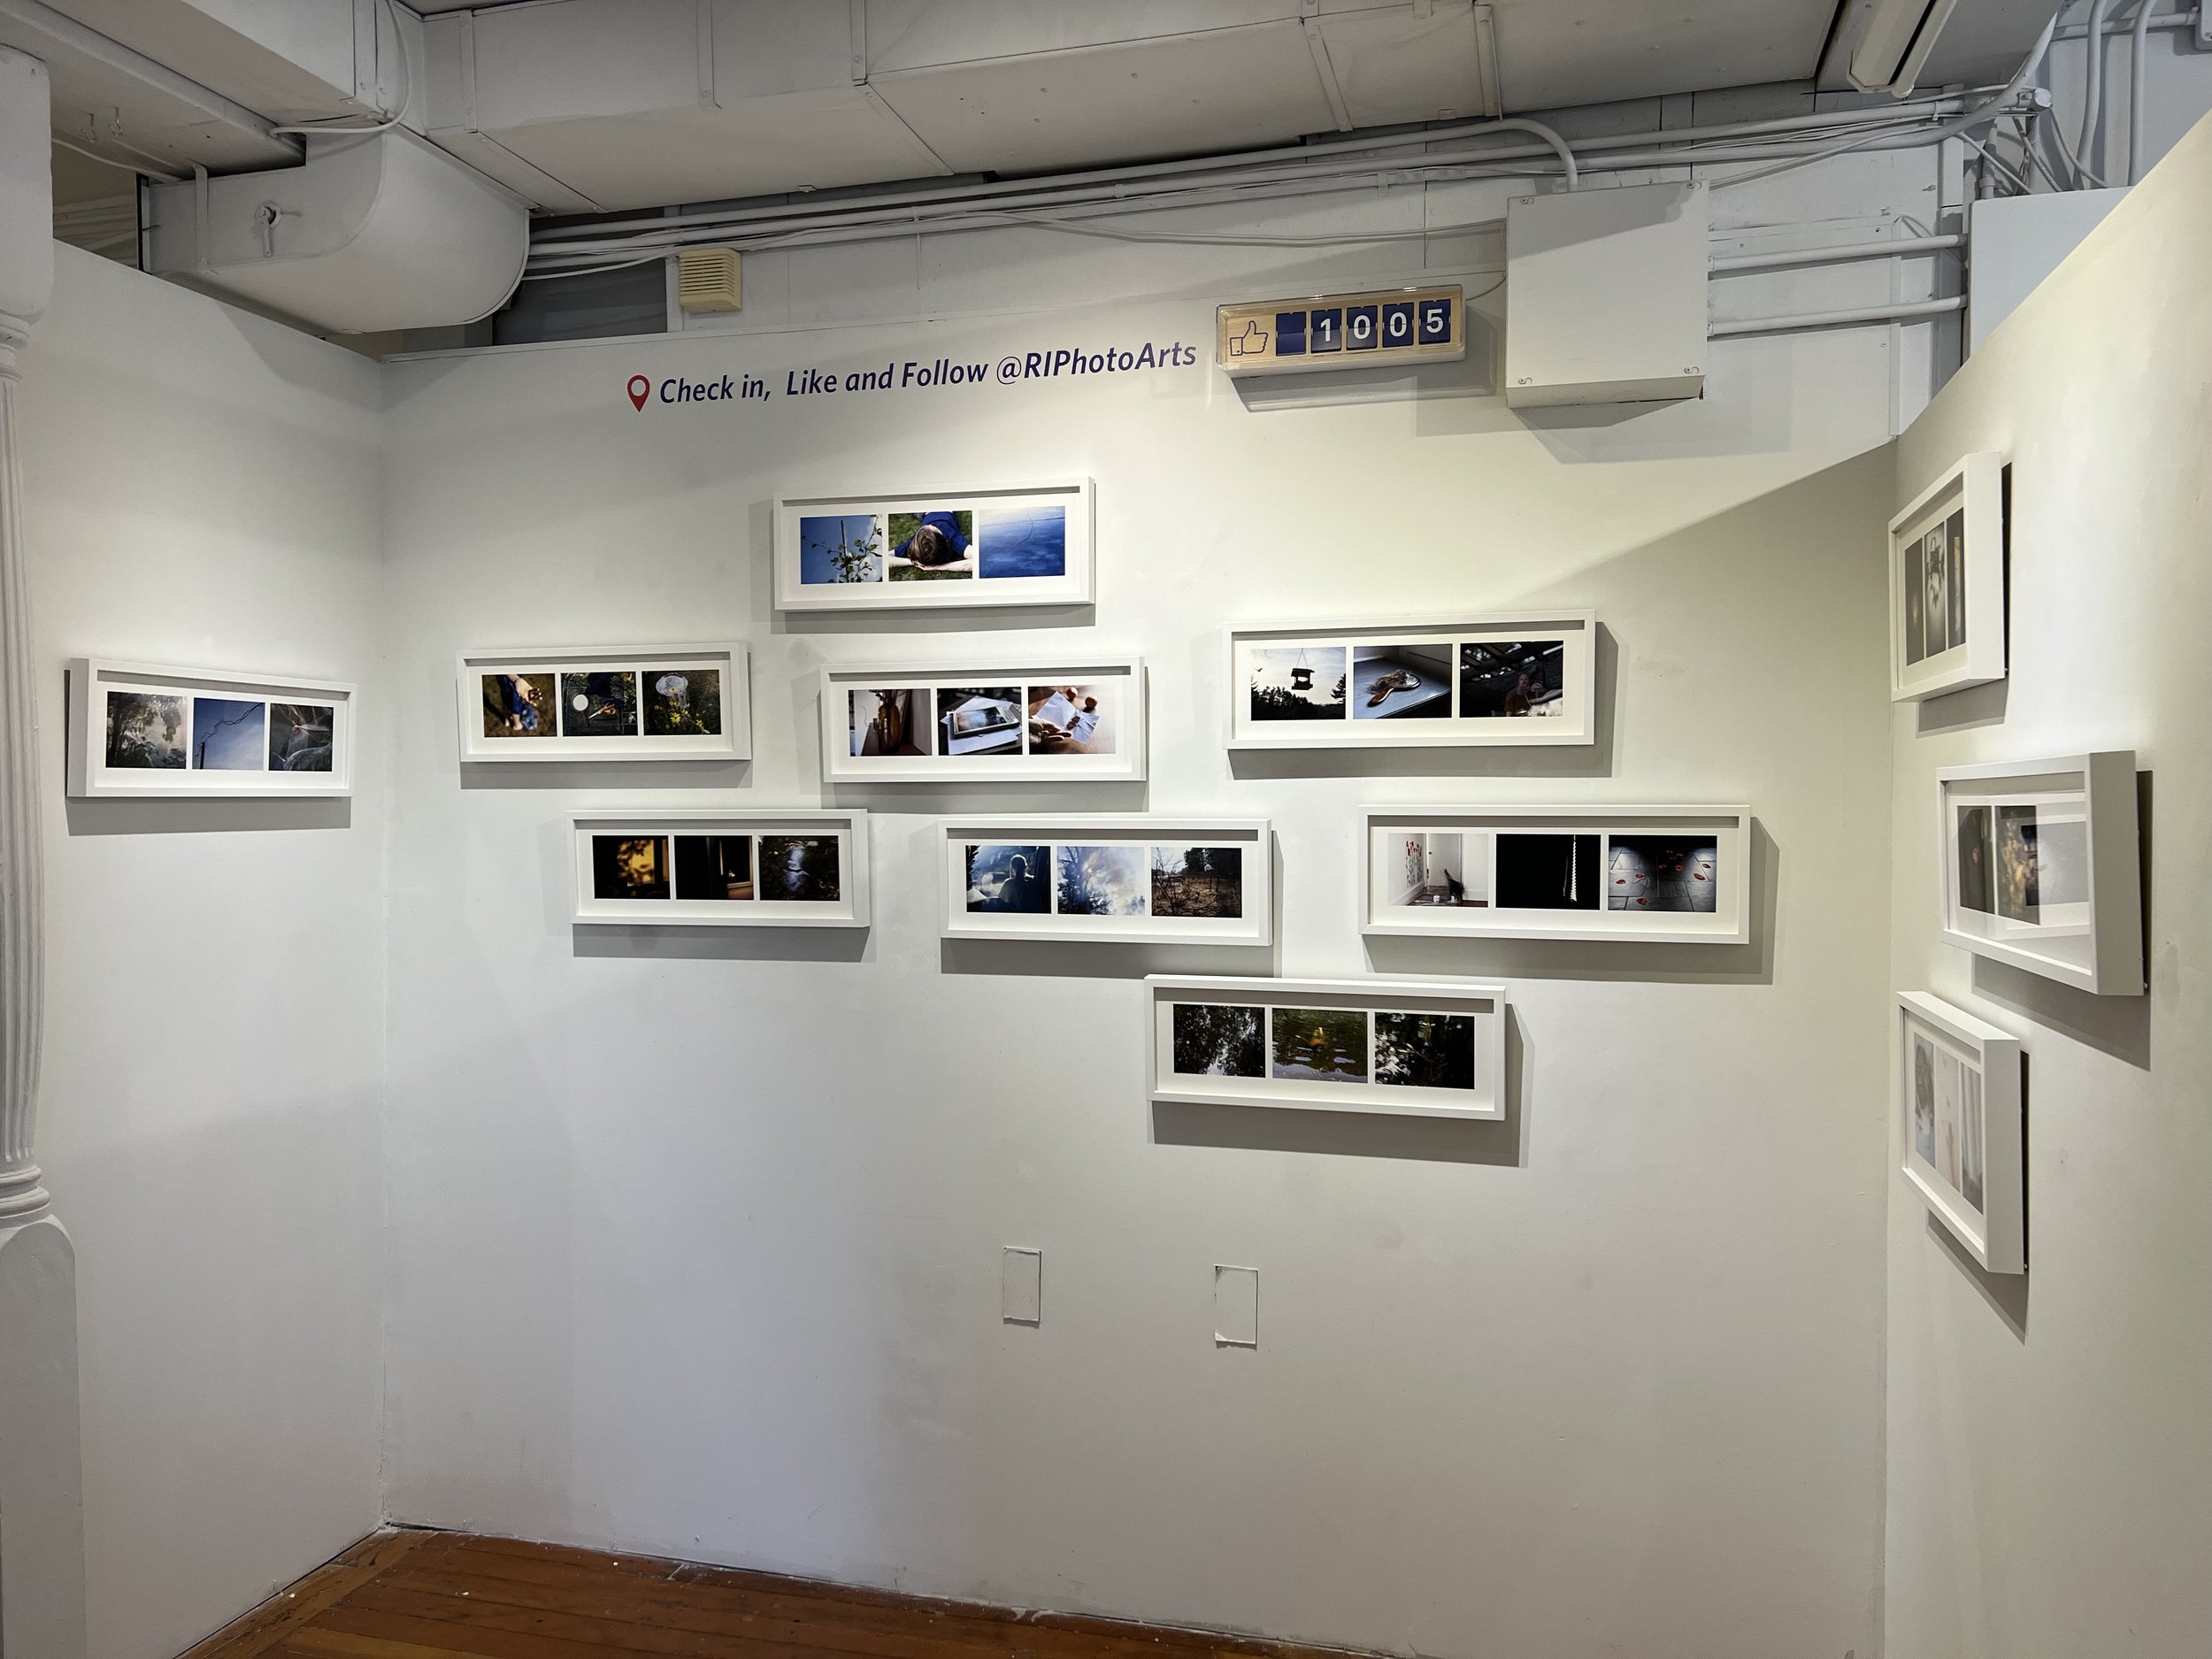  Installation view from Rhode Island Center for Photographic Arts. Photo by David DeMelim 